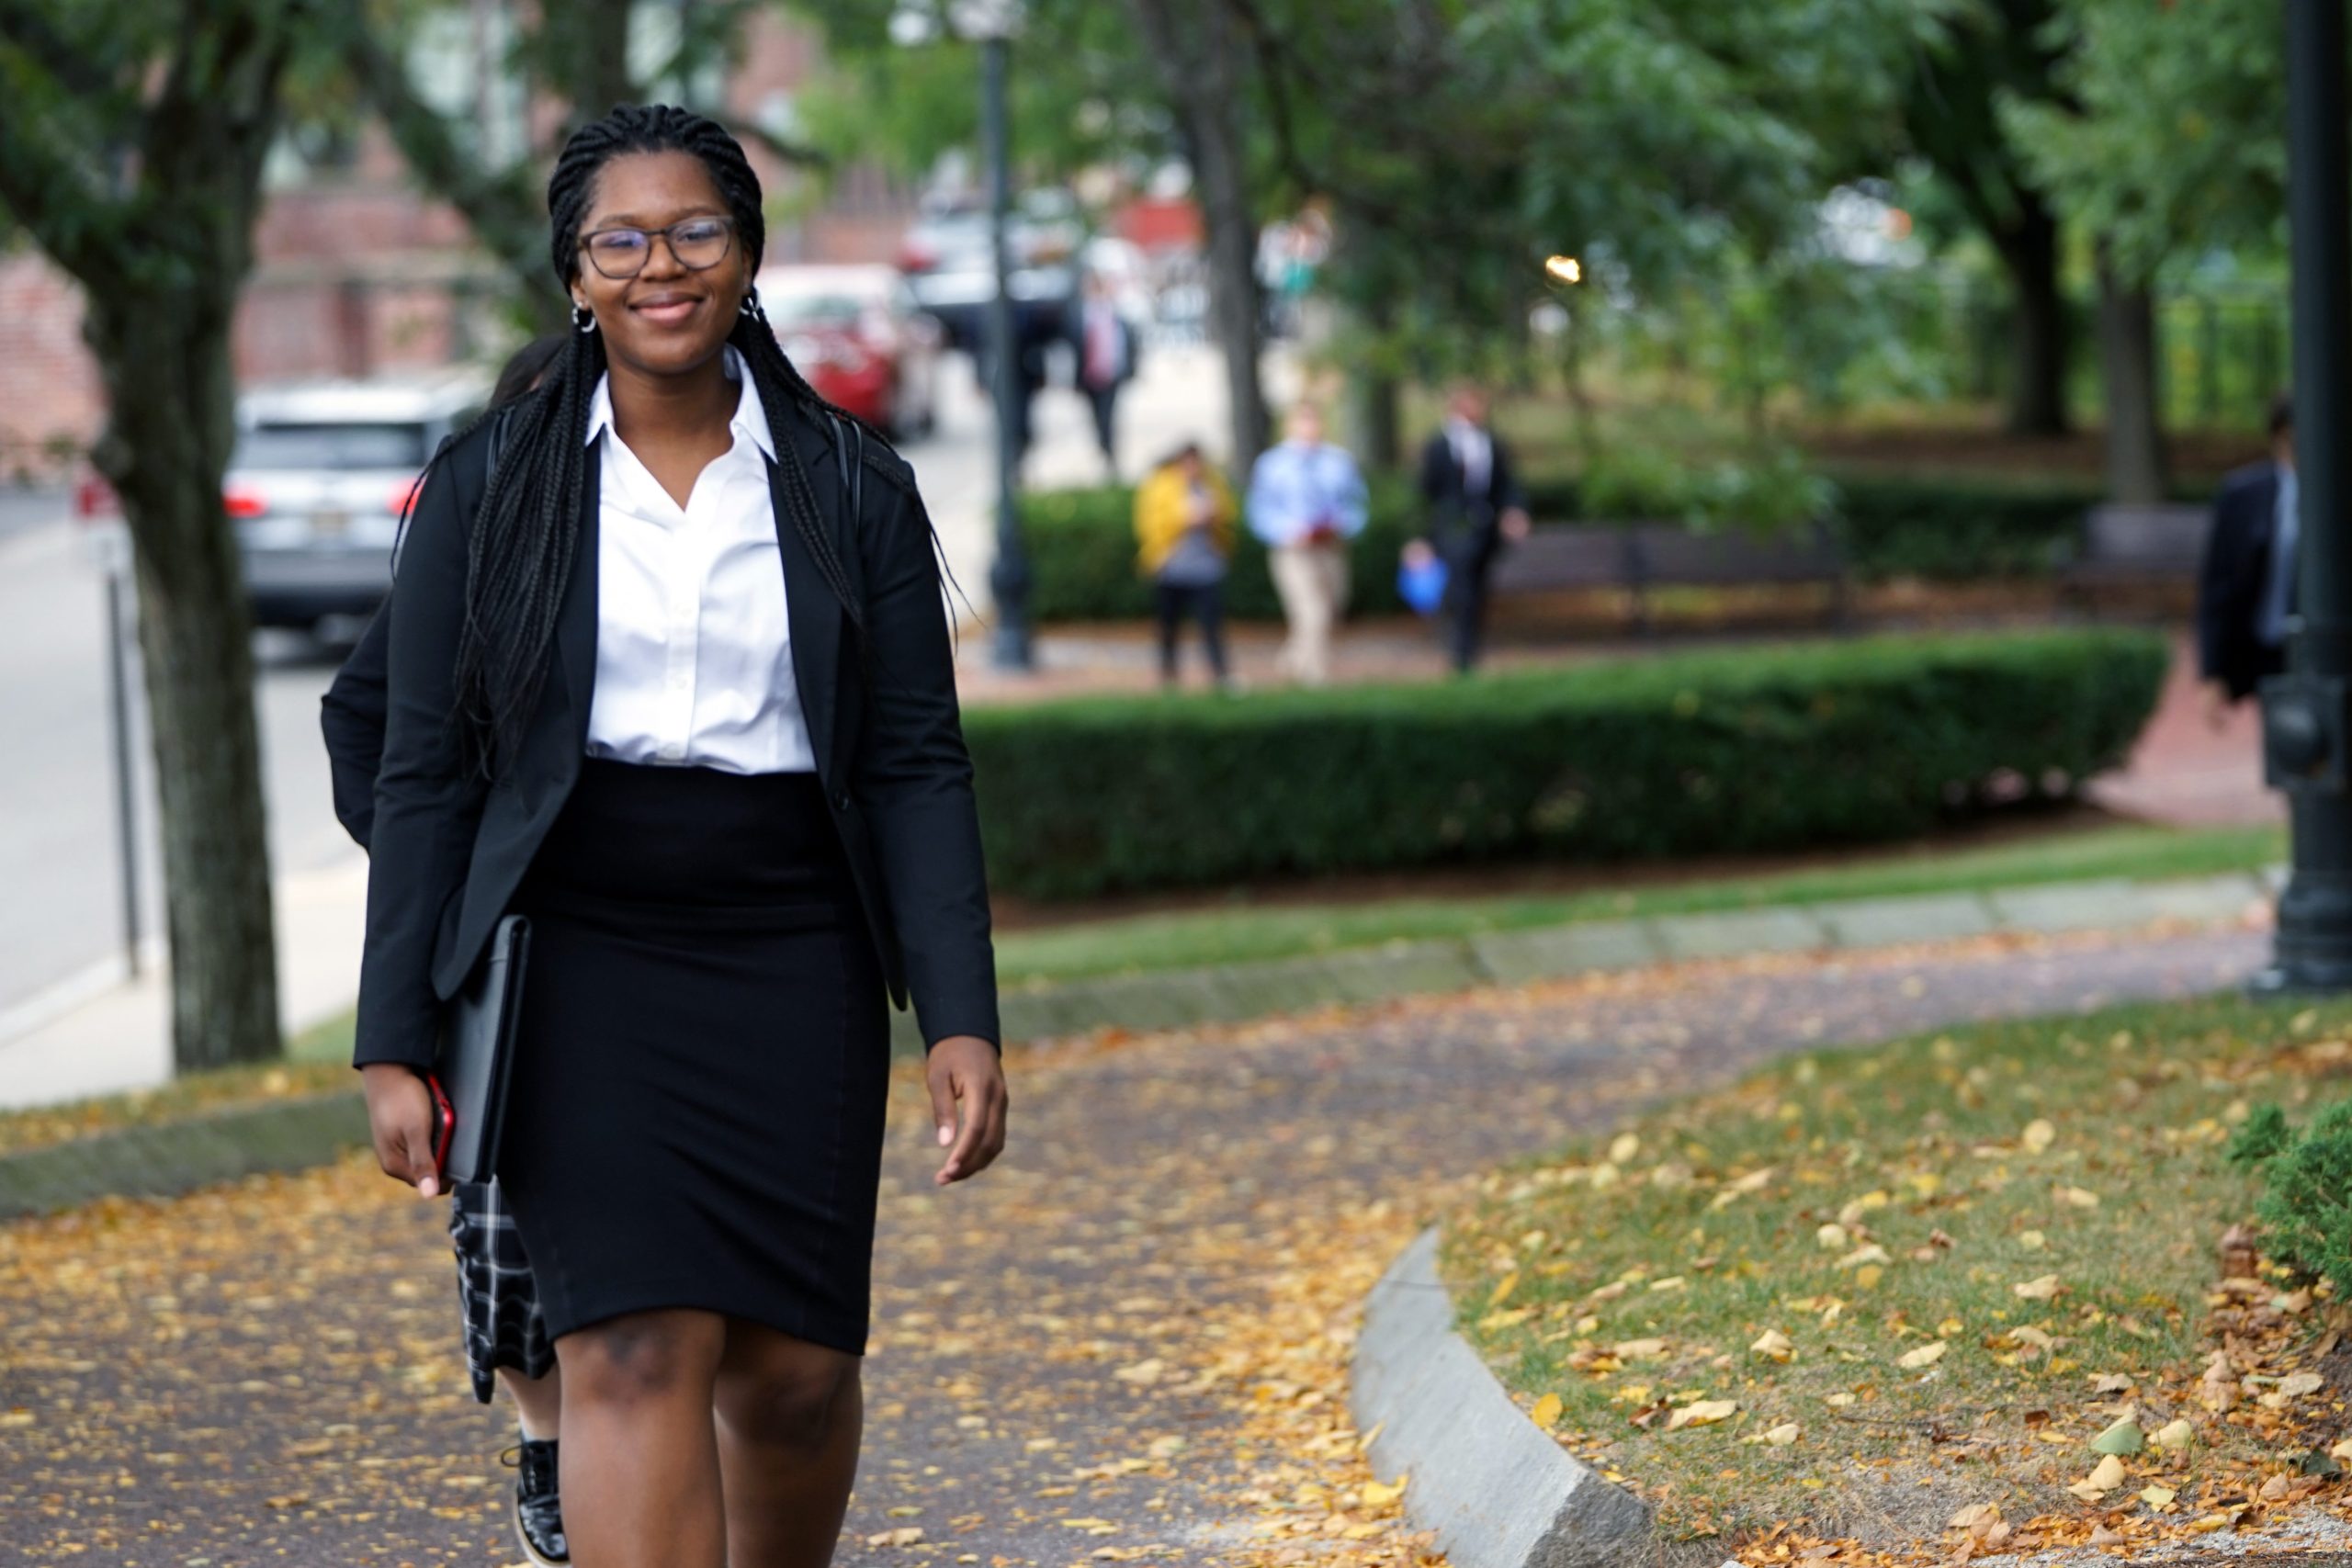 A female student in business attire walking